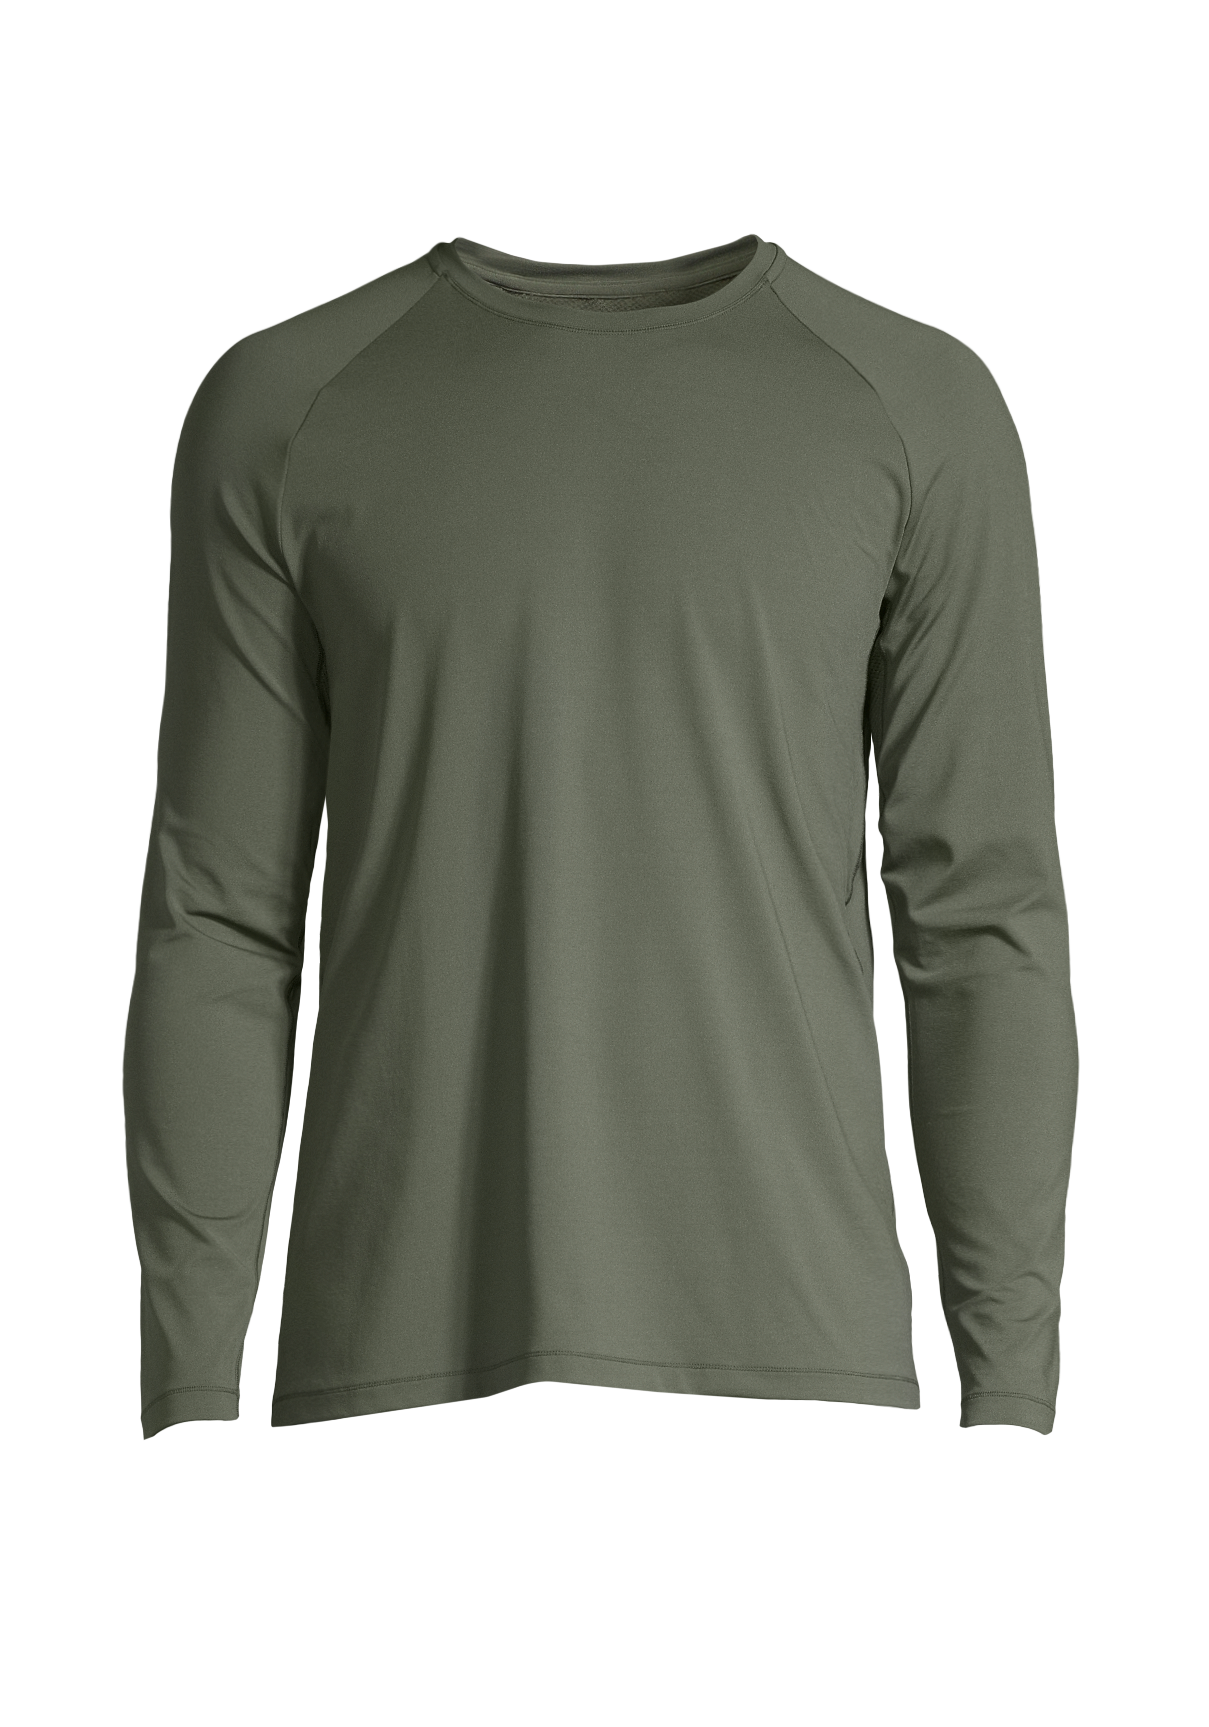 M Structured Longsleeve - Northern Green | CASALL